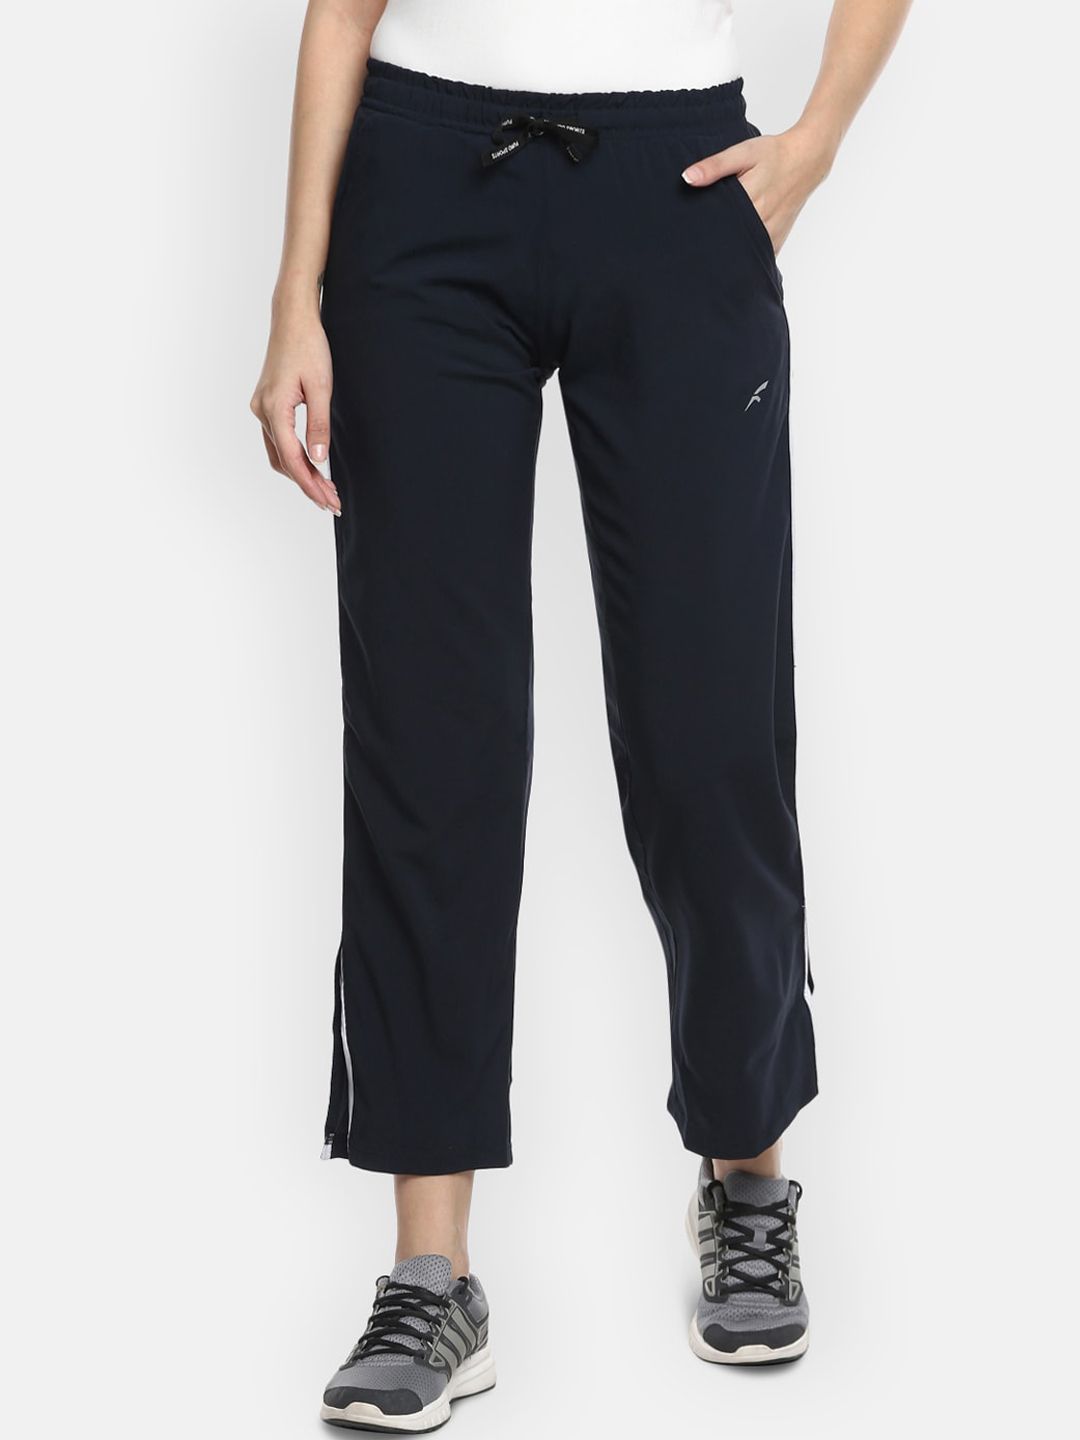 FURO by Red Chief Women Navy Blue & White Solid Track Pants Price in India